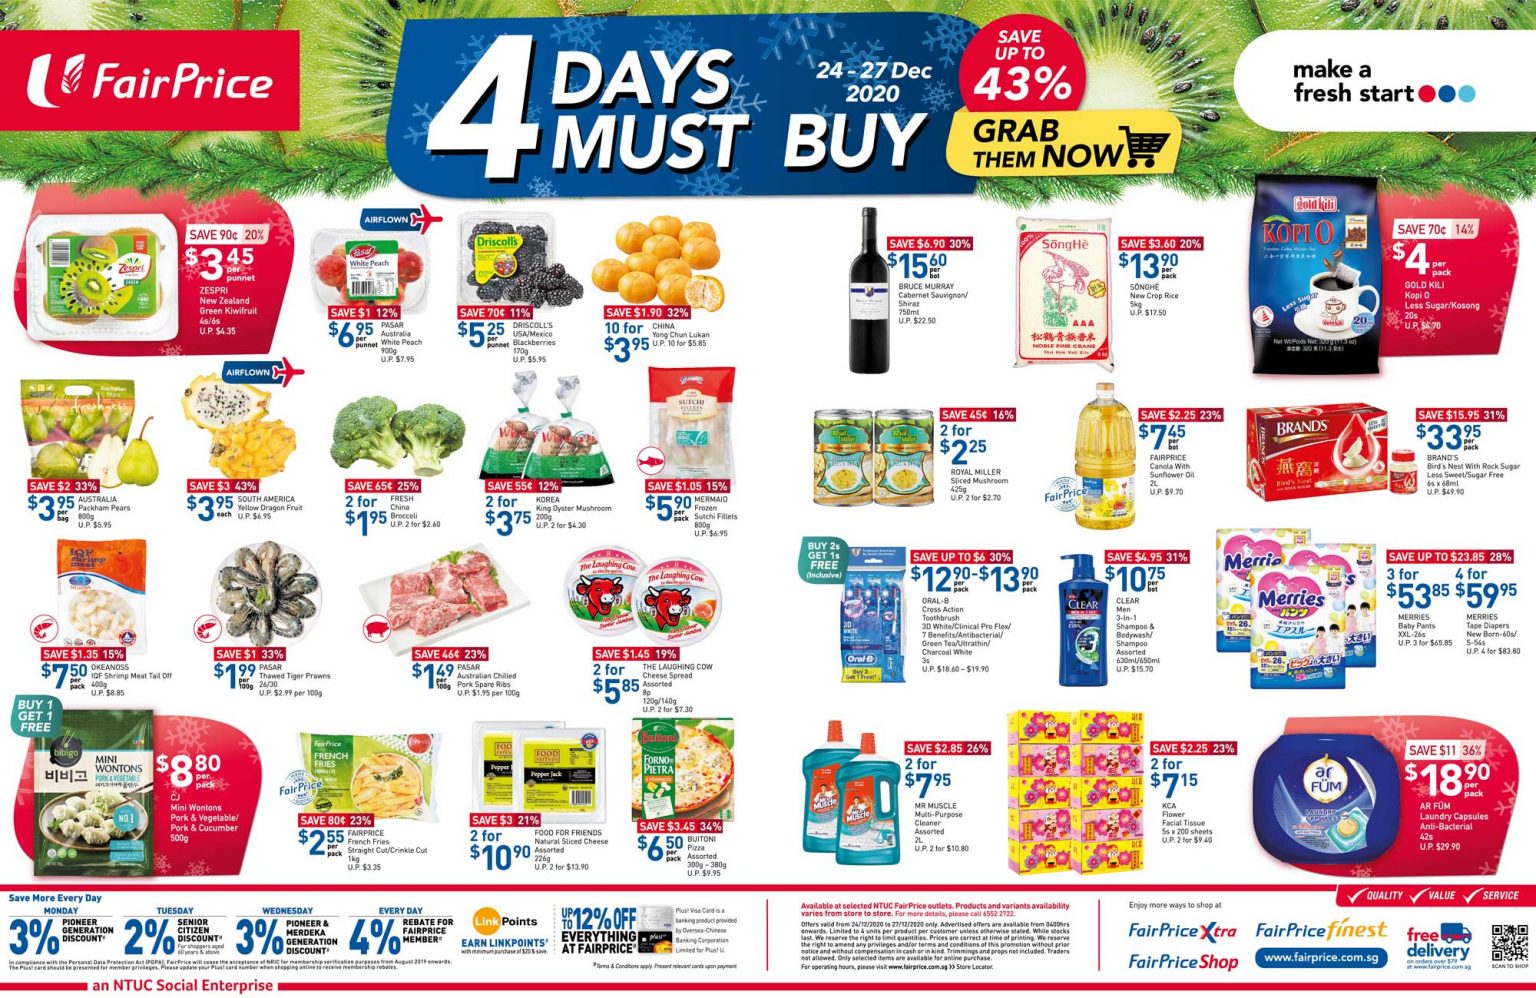 FairPrice’s 4 days must-buy items from 24 - 27 December 2020